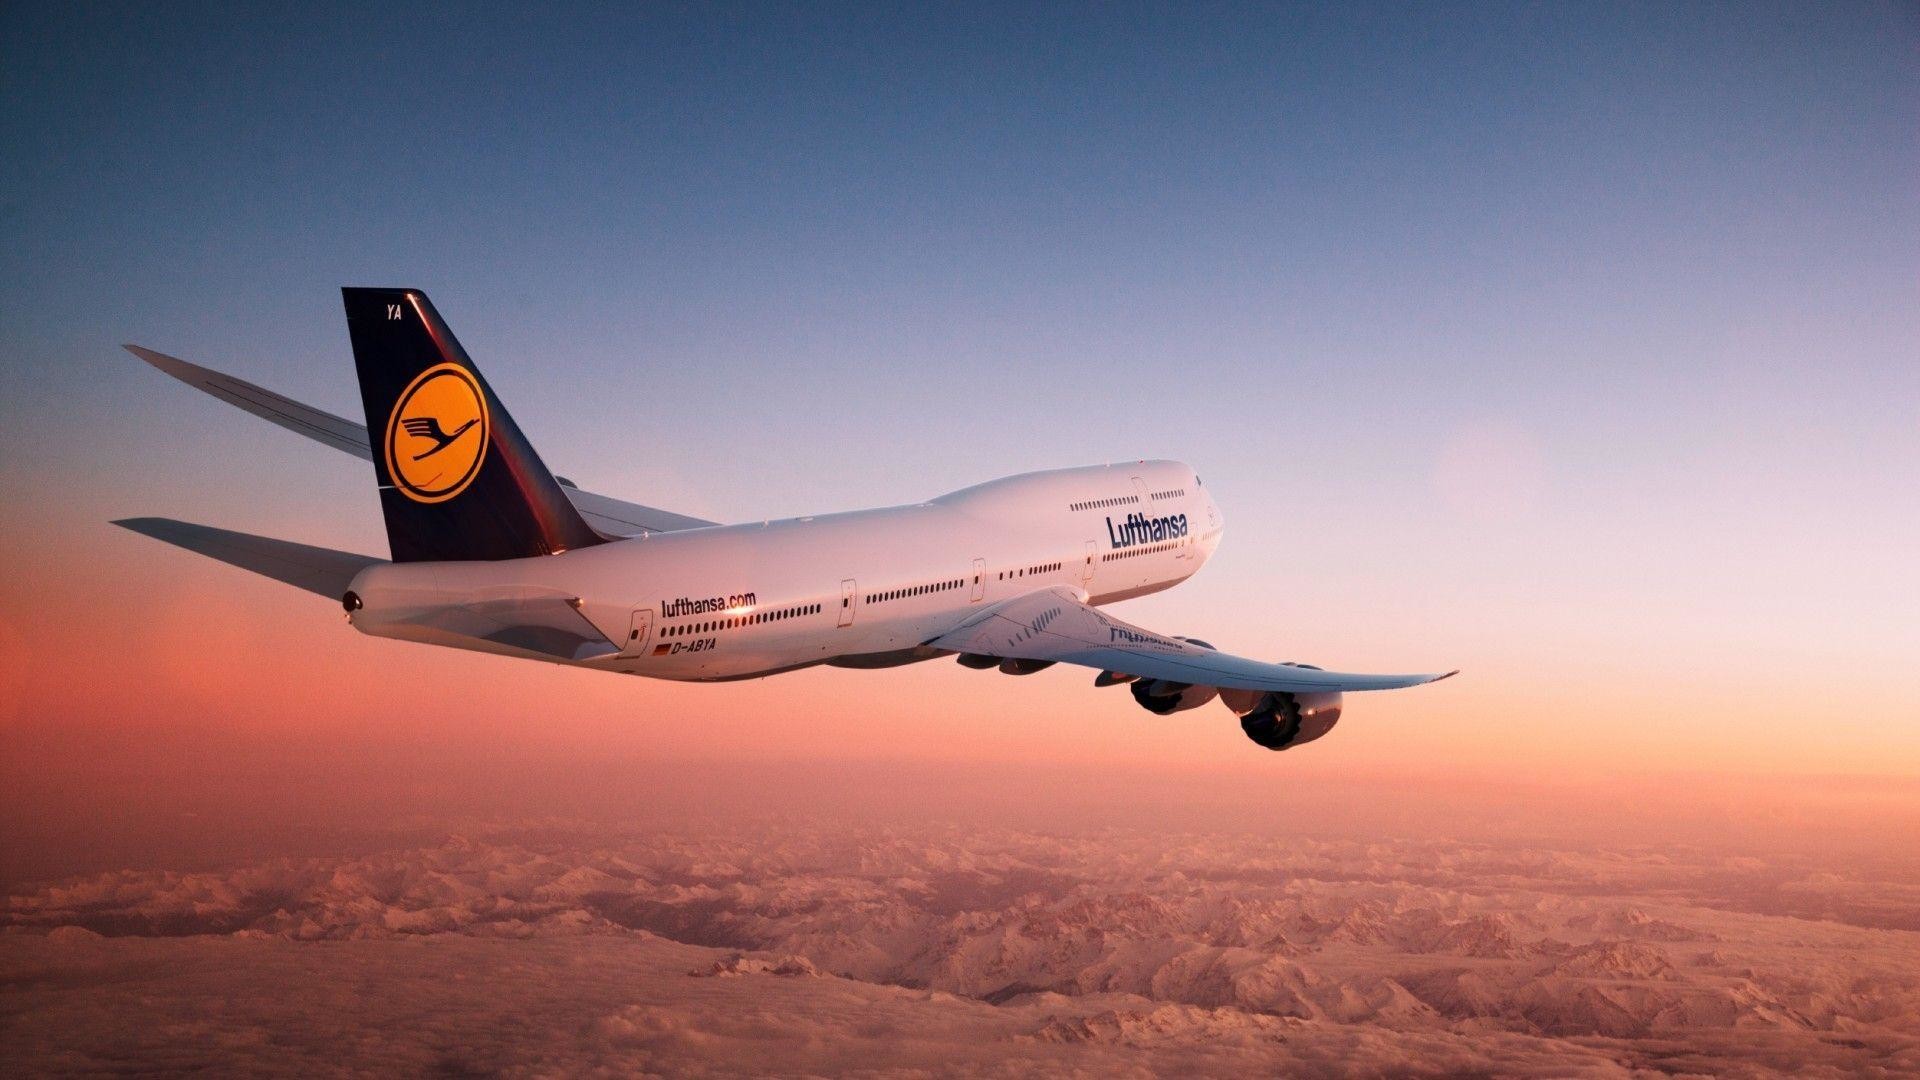 Boeing 747-400F Wallpapers